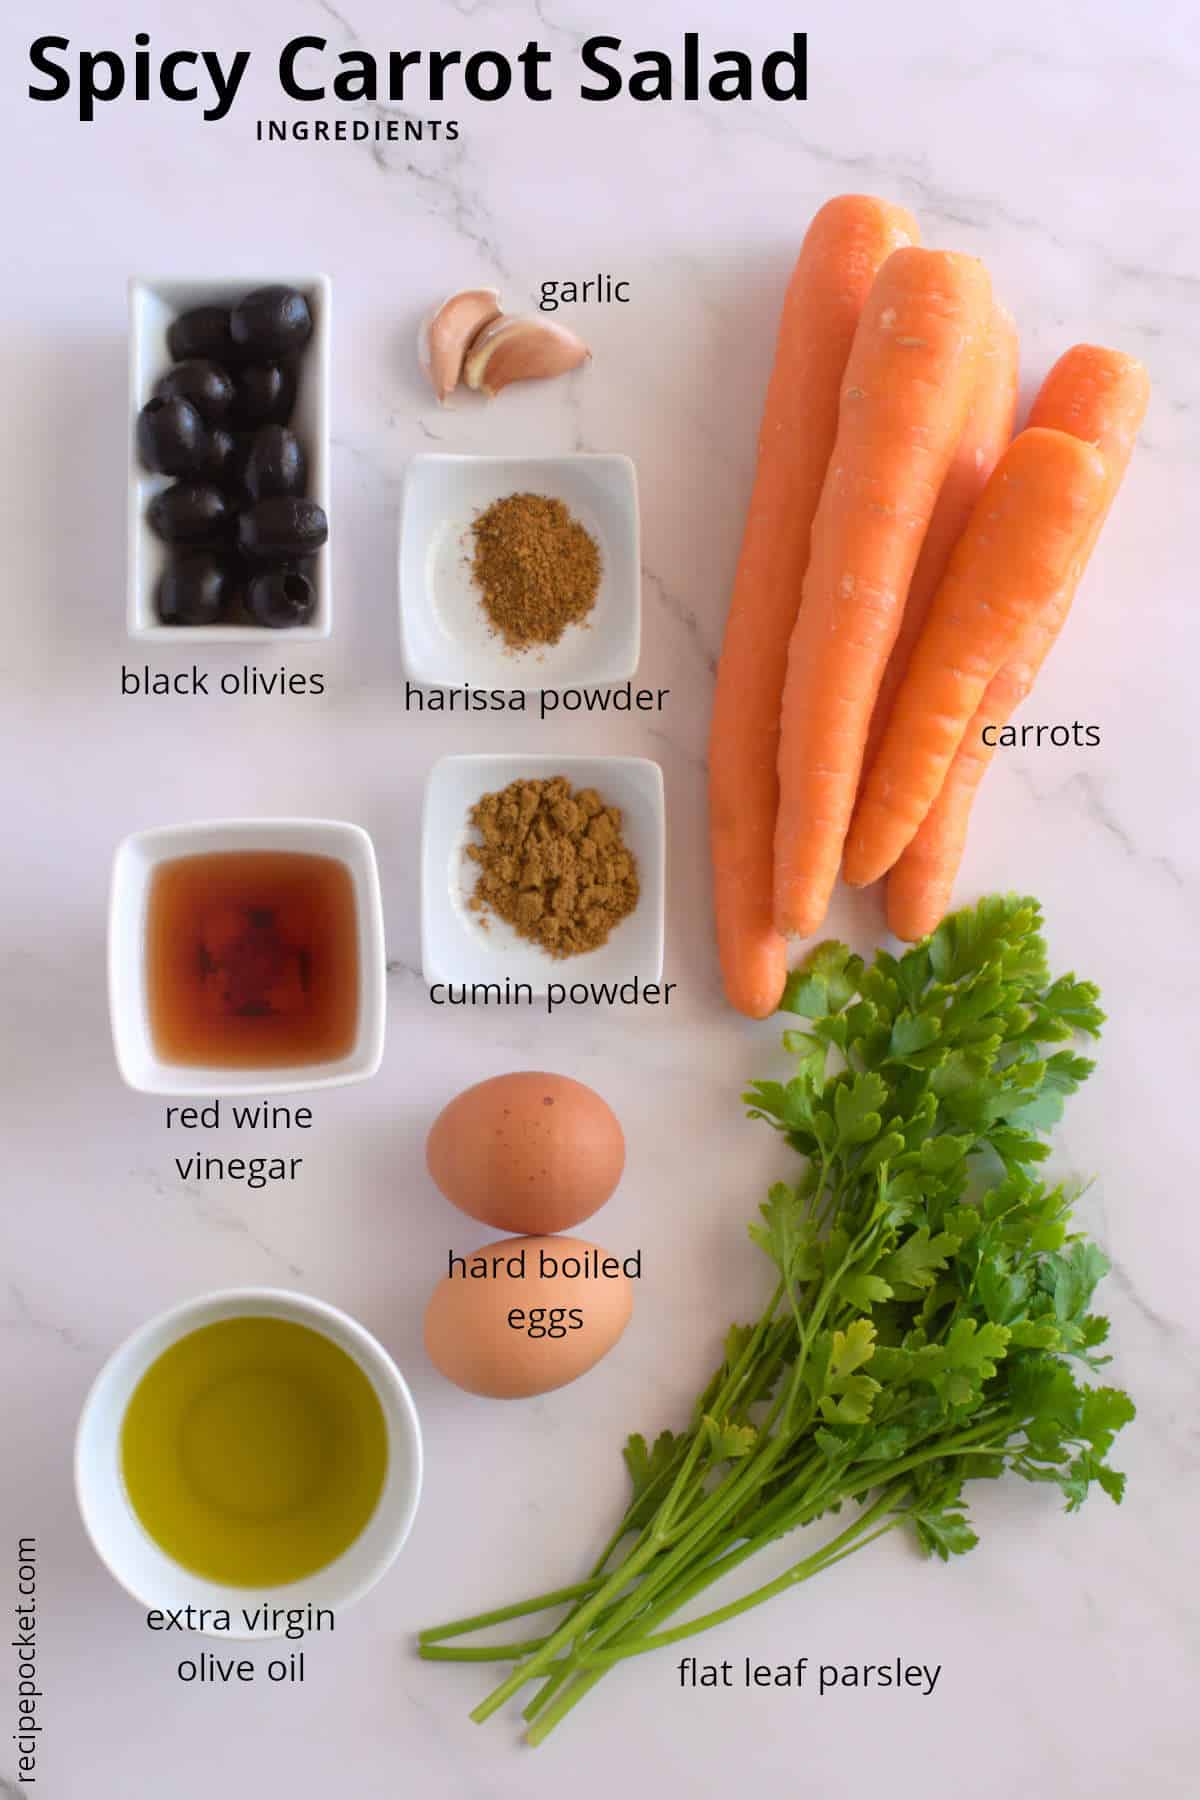 Ingredients image for spicy carrot salad.